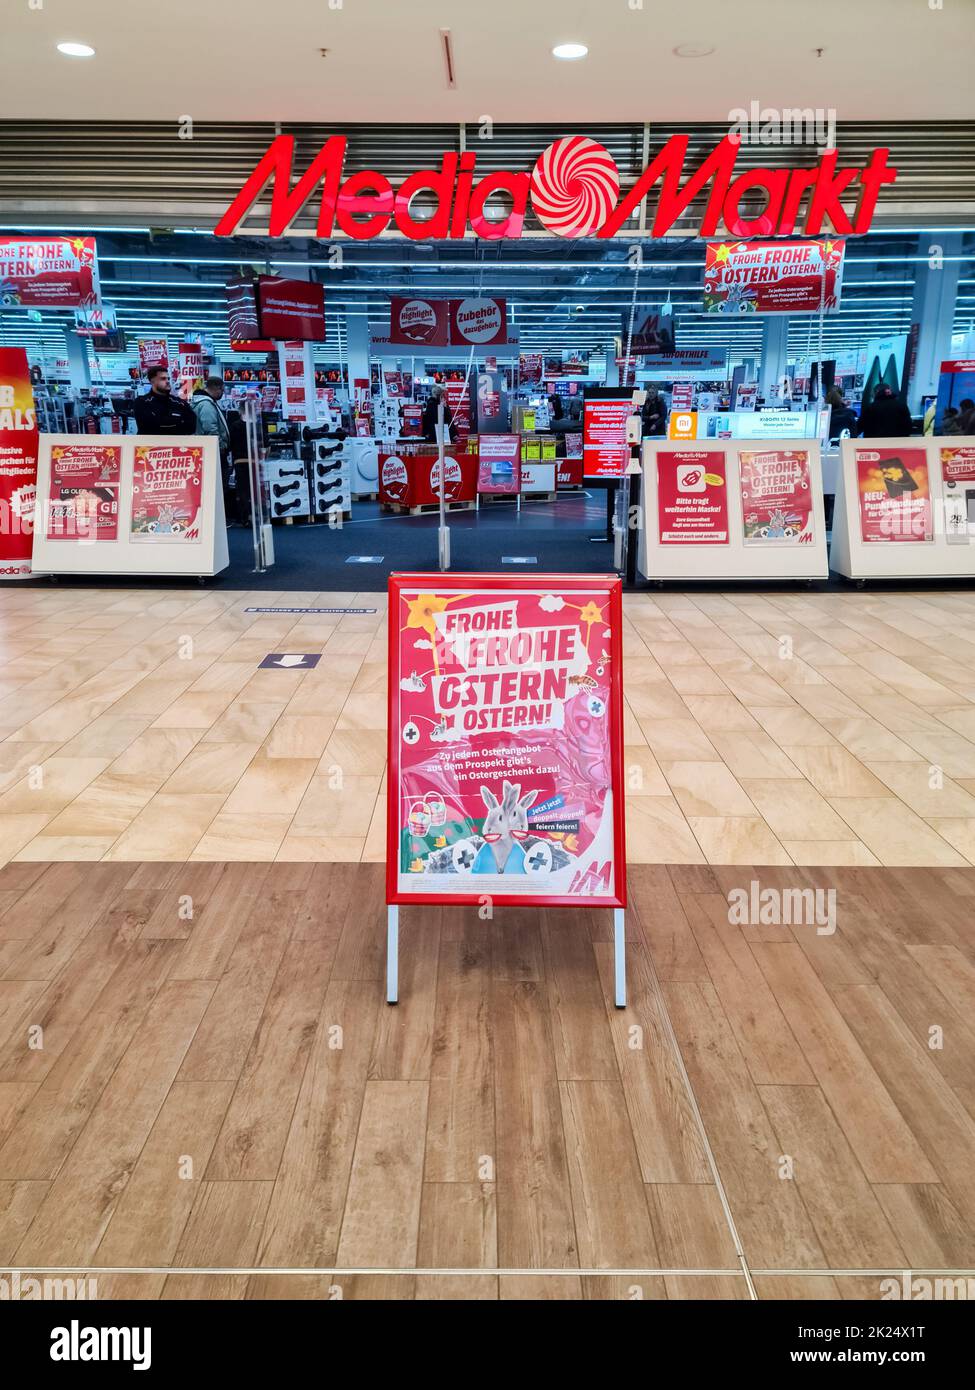 Media Markt sign at store. Media Markt is a German multinational chain of  stores selling consumer electronics with over 1000 stores in Europe Stock  Photo - Alamy